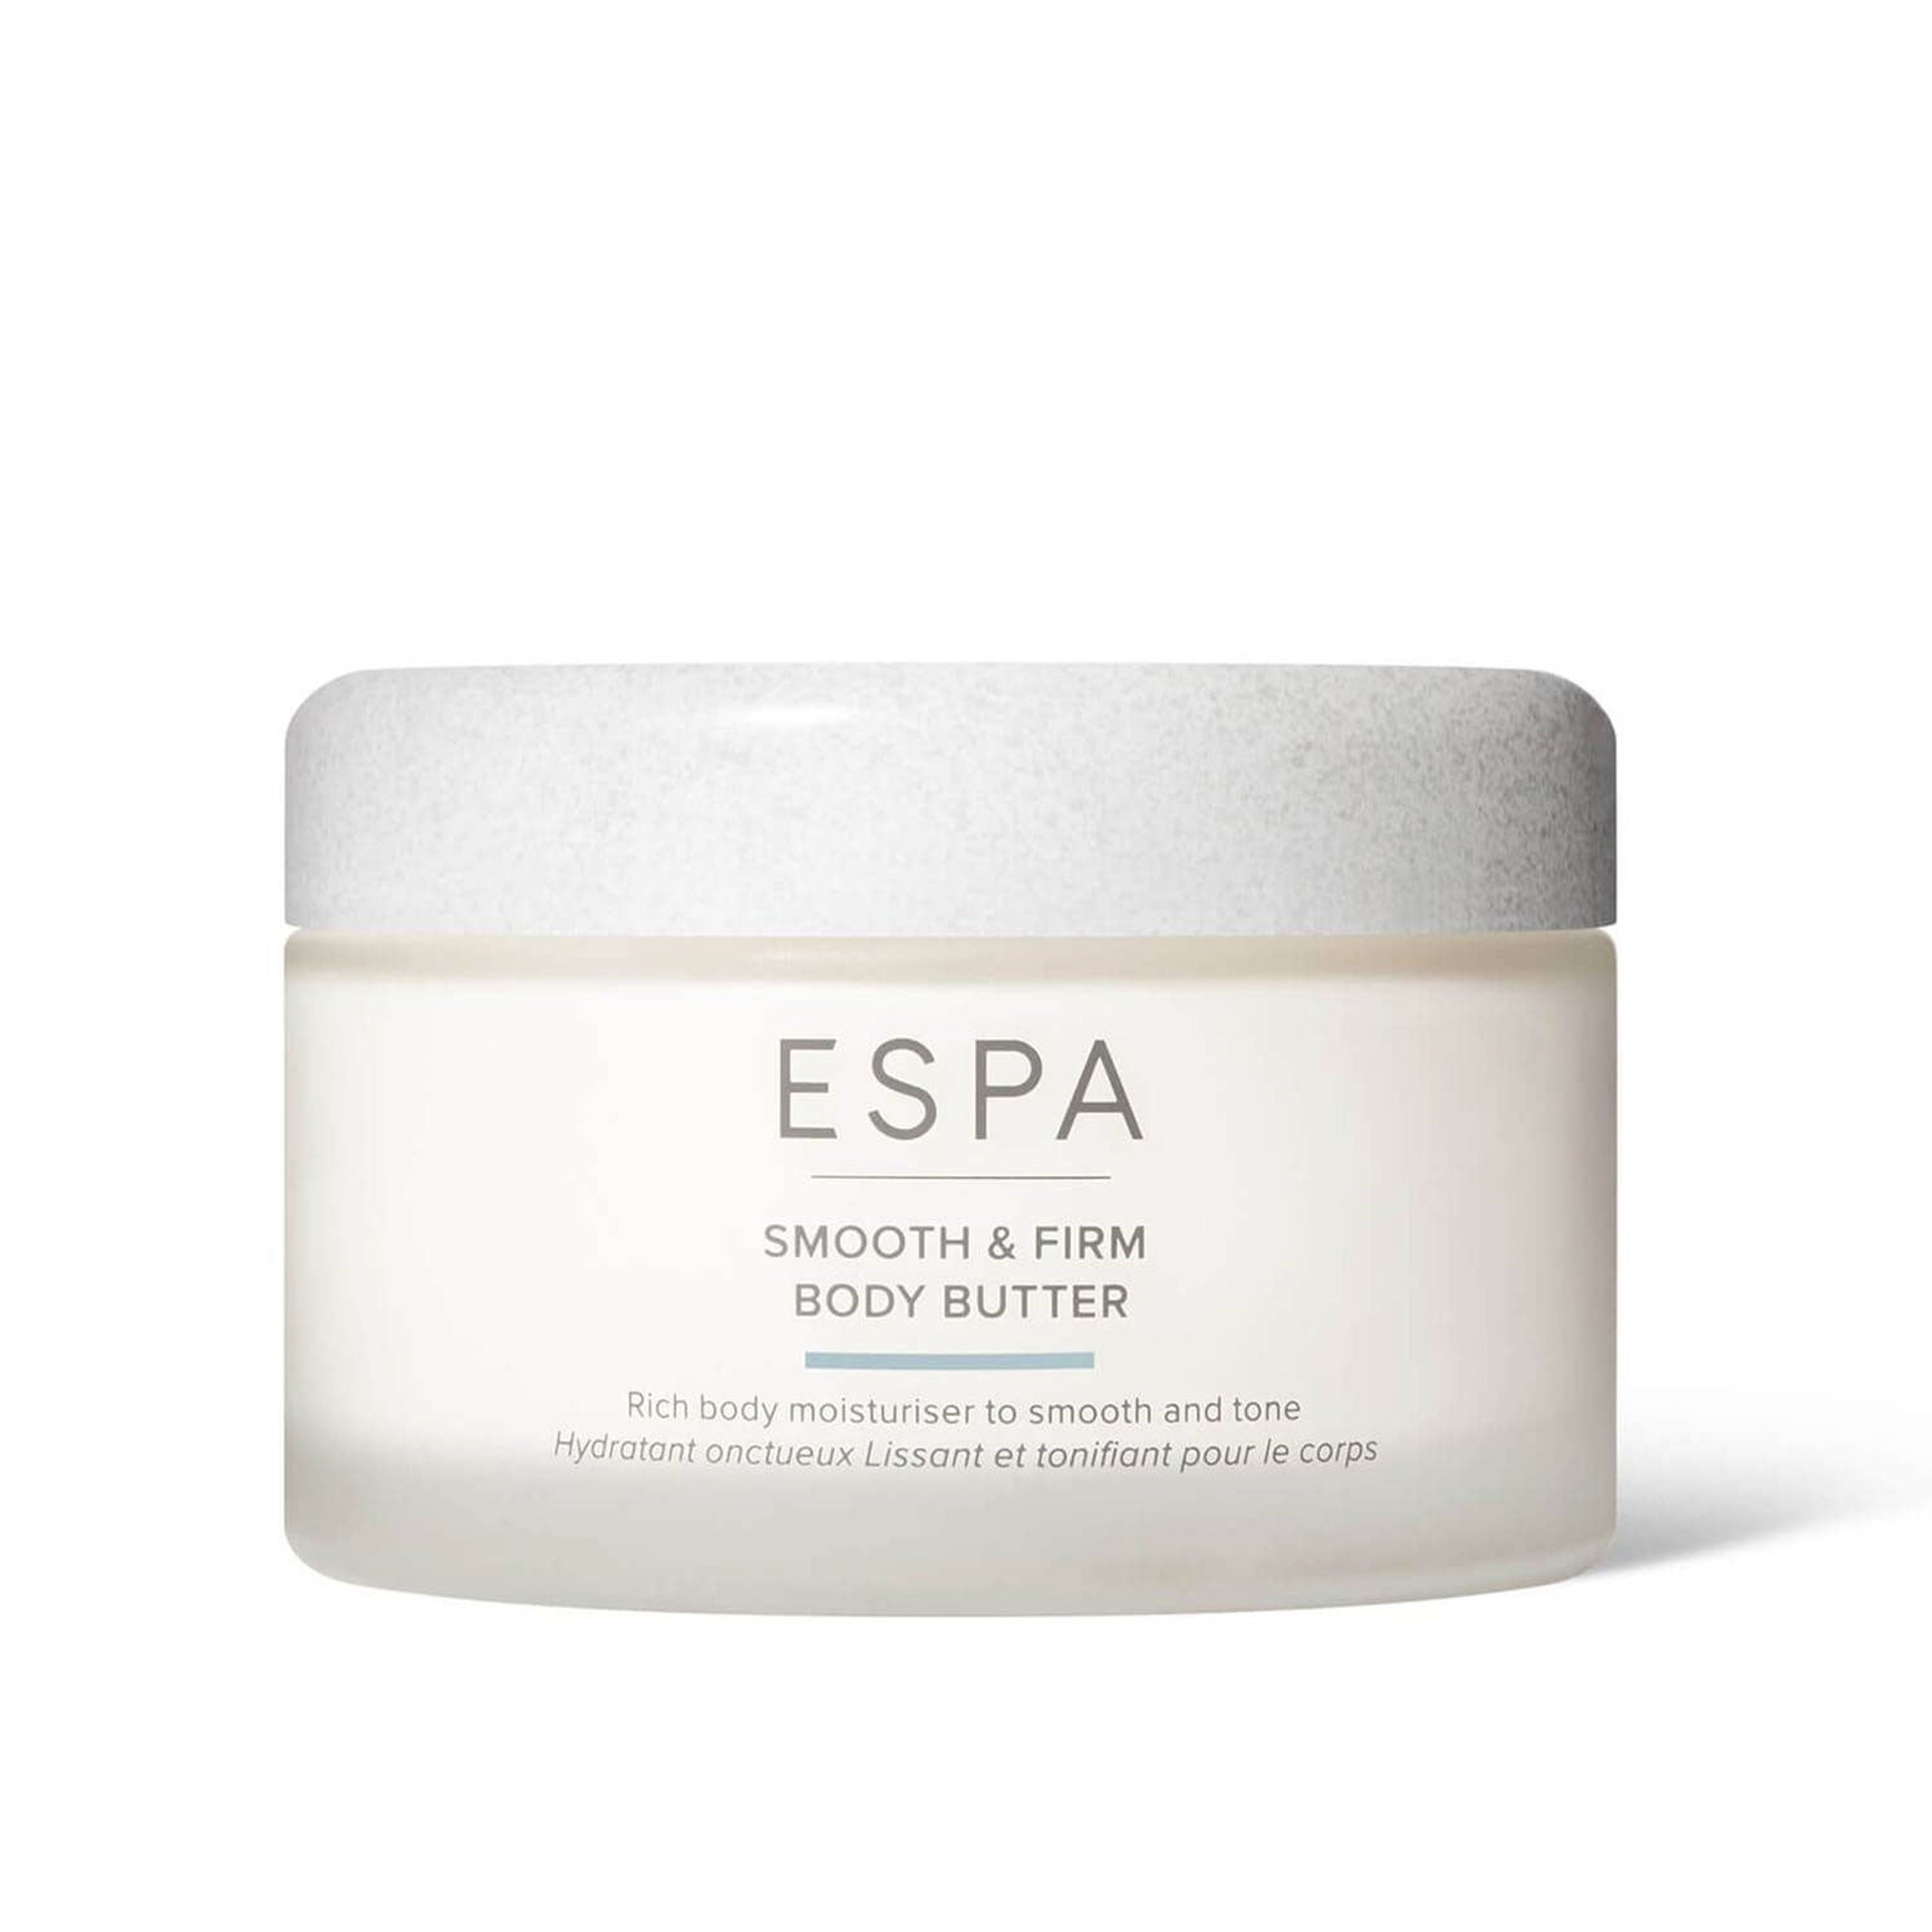  Smooth & Firm Body Butter